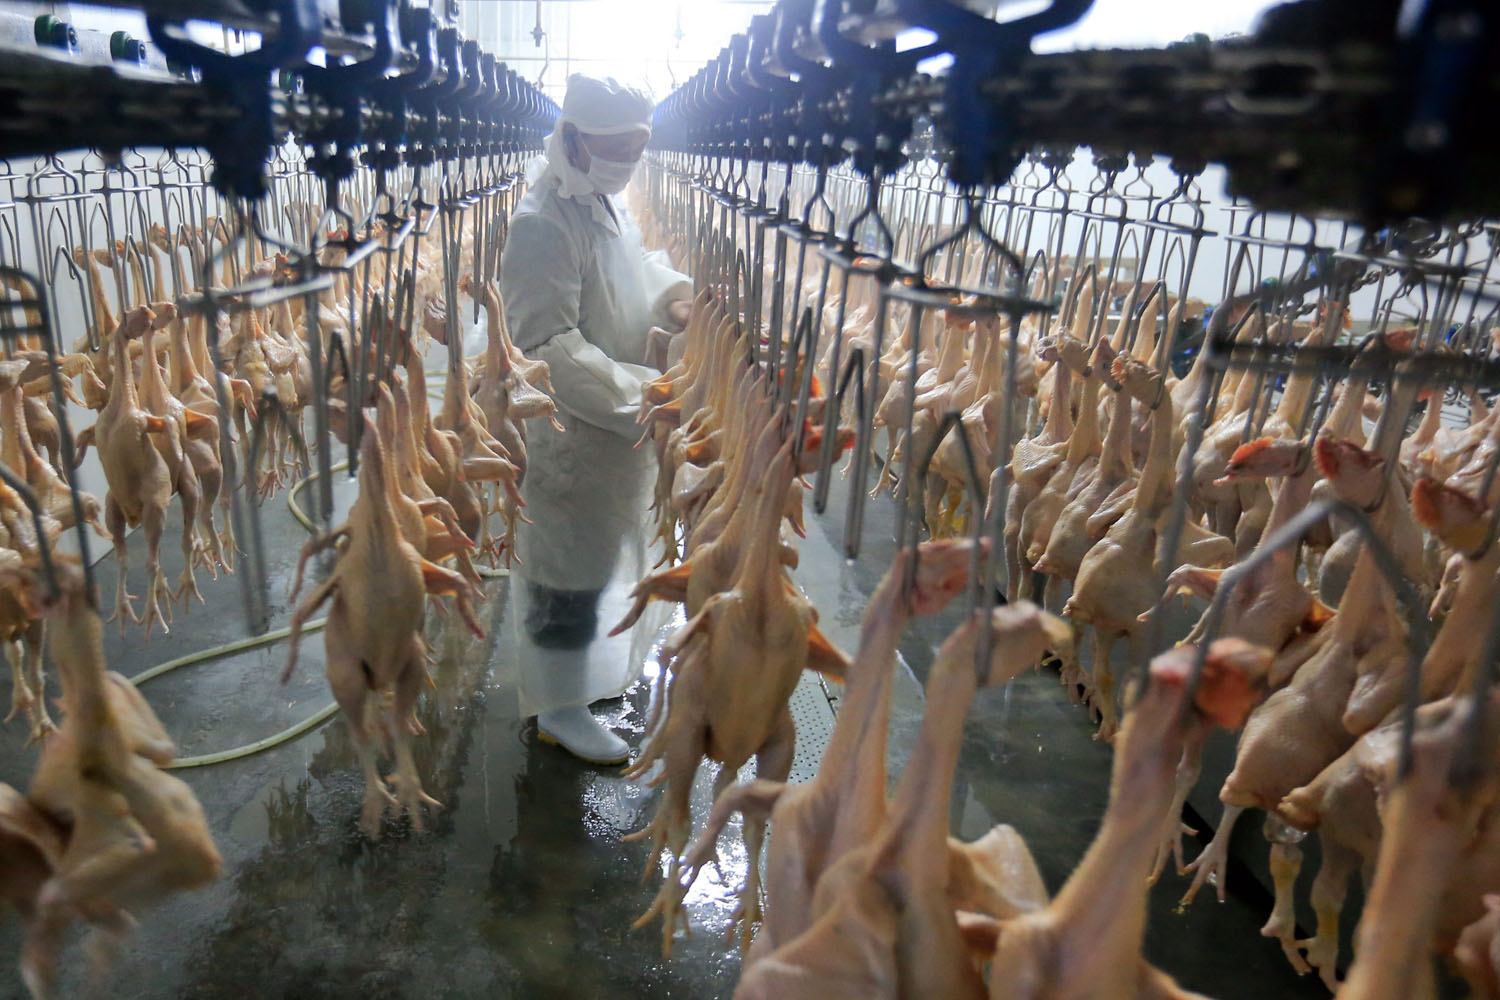 April 16, 2013. A chicken slaughter employee cleans broilers at ShengHua chicken slaughter in a suburb of Shanghai.